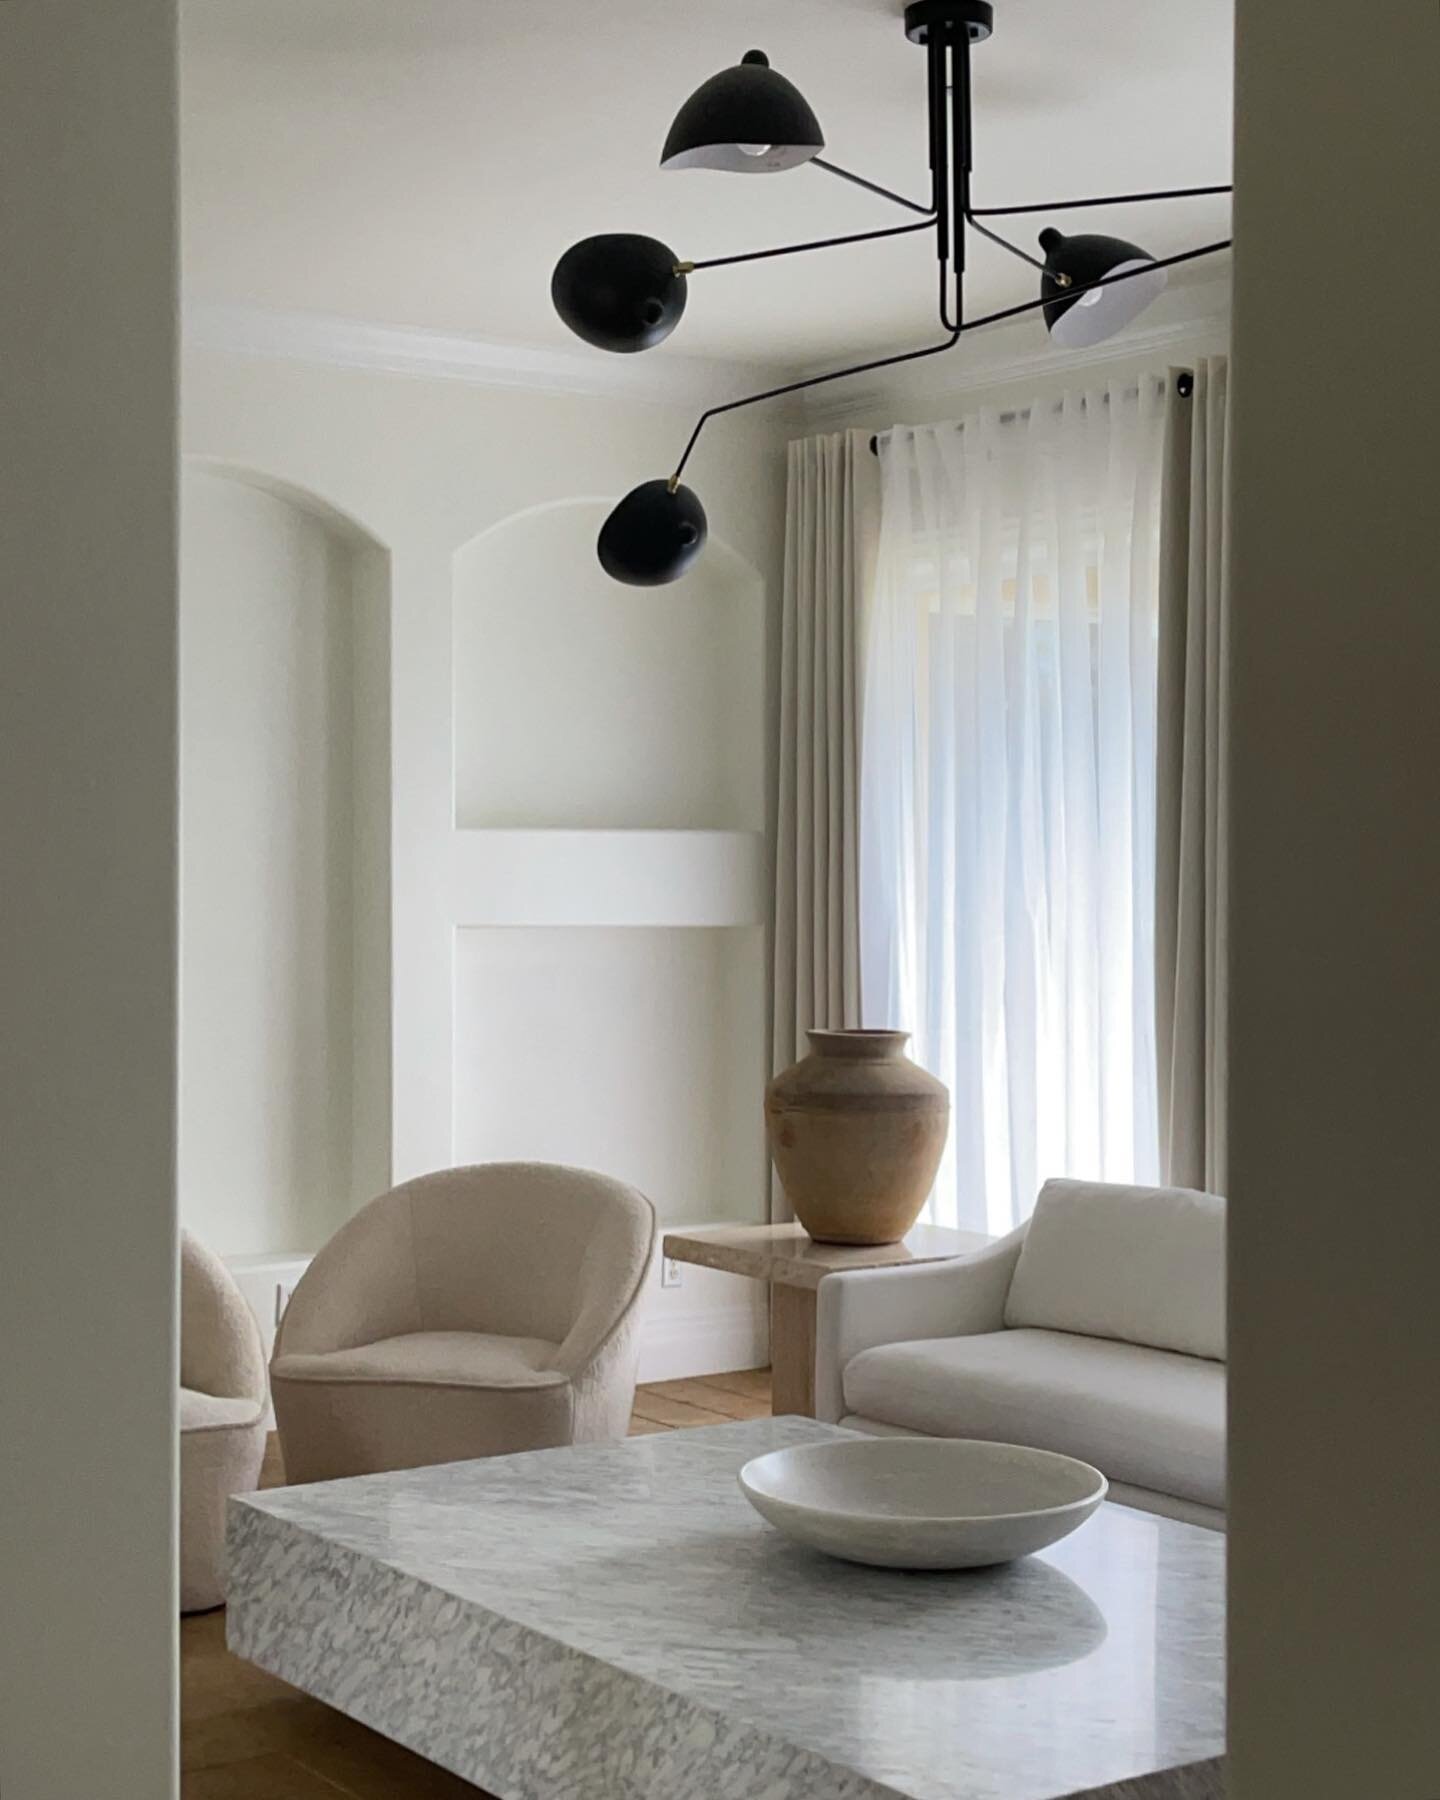 I love the elevated simplicity this @offwhitepalette Marble Bowl brings to this space. 

#nthomespaces #interiorspaces #neutralaesthetics #cornersofmyhome #aesthetic #homeaesthetics #transitionalstyle #homedesign #interiordesign #offwhitepalette